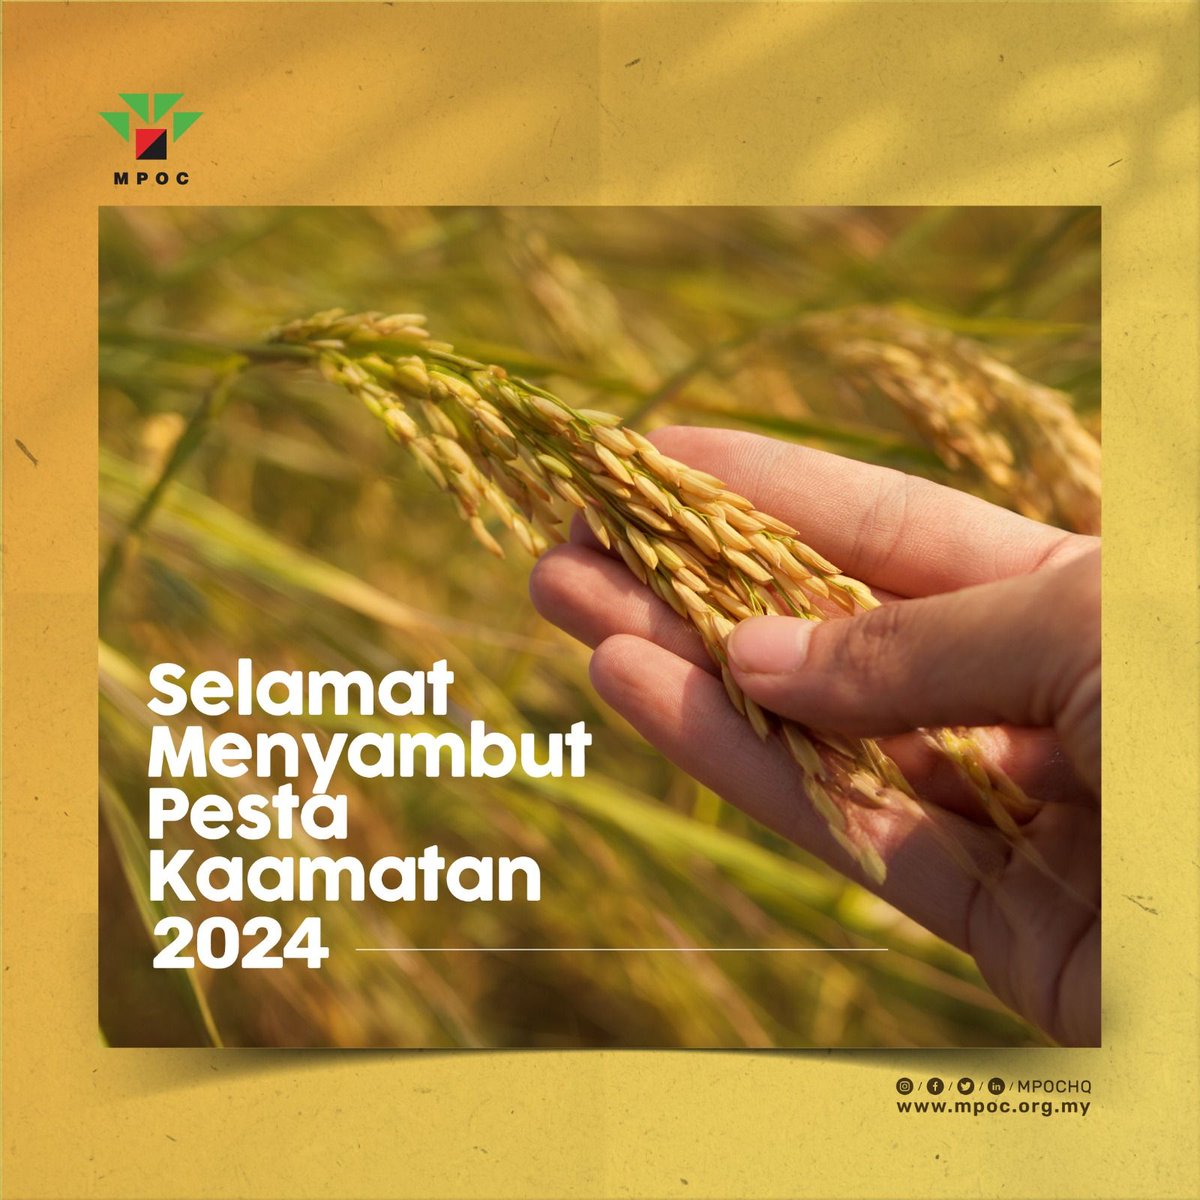 Kotobian do Tadau Tagayo do Kaamatan! #MPOC would like to wish a Happy #Kaamatan to all who celebrate this joyous occasion, especially in the state of Sabah. May the festivities bring delight to you, your family, and friends. #Aramaiti #KaamatanBeyondFoodSecurity